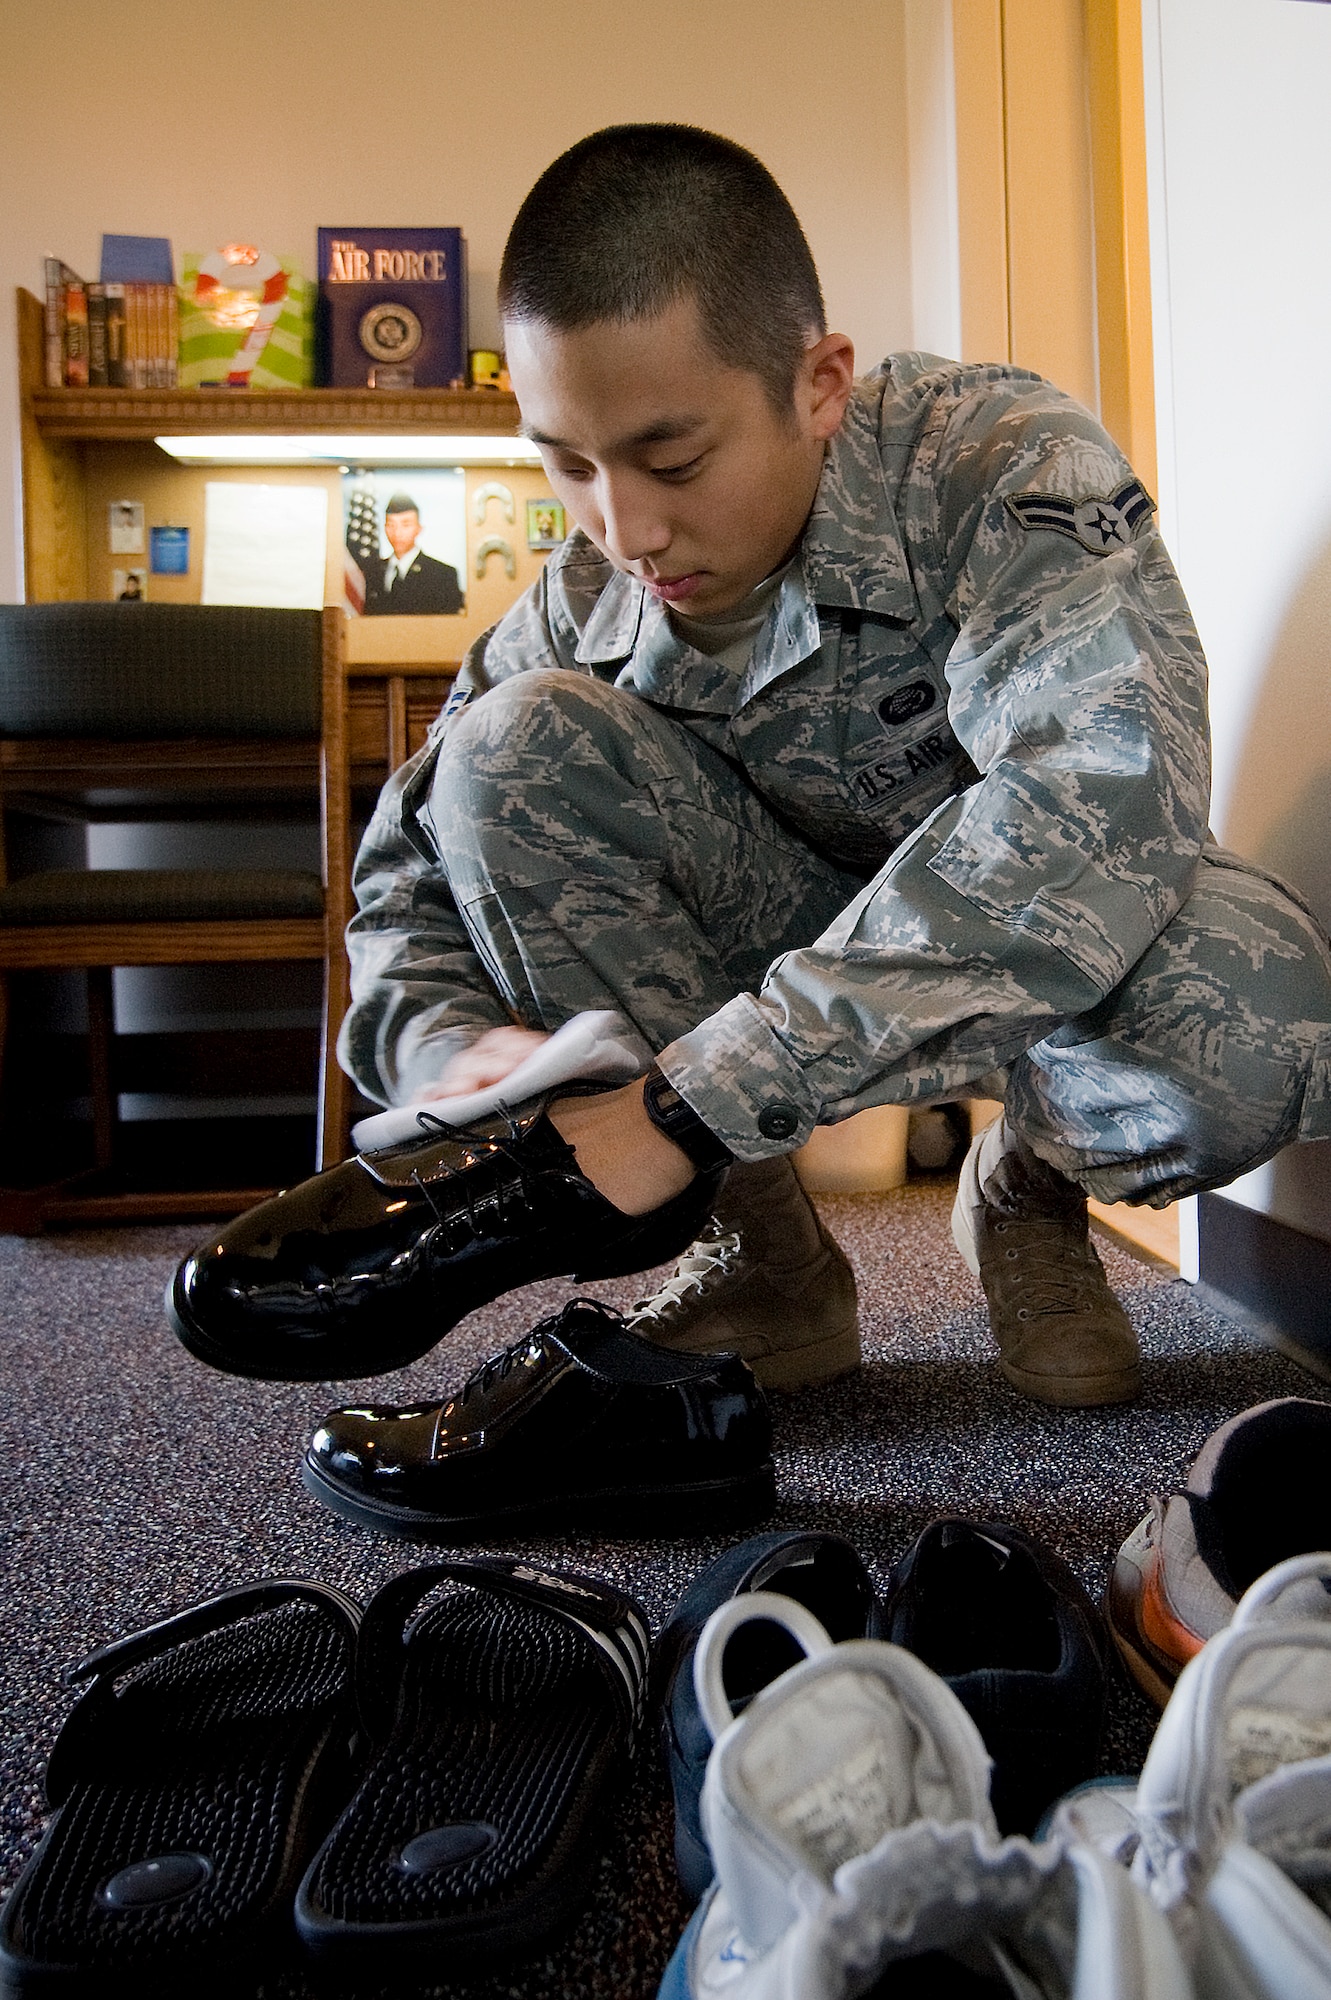 Airman 1st Class Daniel Kim, a technician in the 62nd Force Support Squadron career developement section, shines his shoes as part of his daily cleaning regimen. Airman Kim was recently presented a coin after a wing inspector was amazed with how clean he kept his room. (U.S. Air Force photo/Abner Guzman)